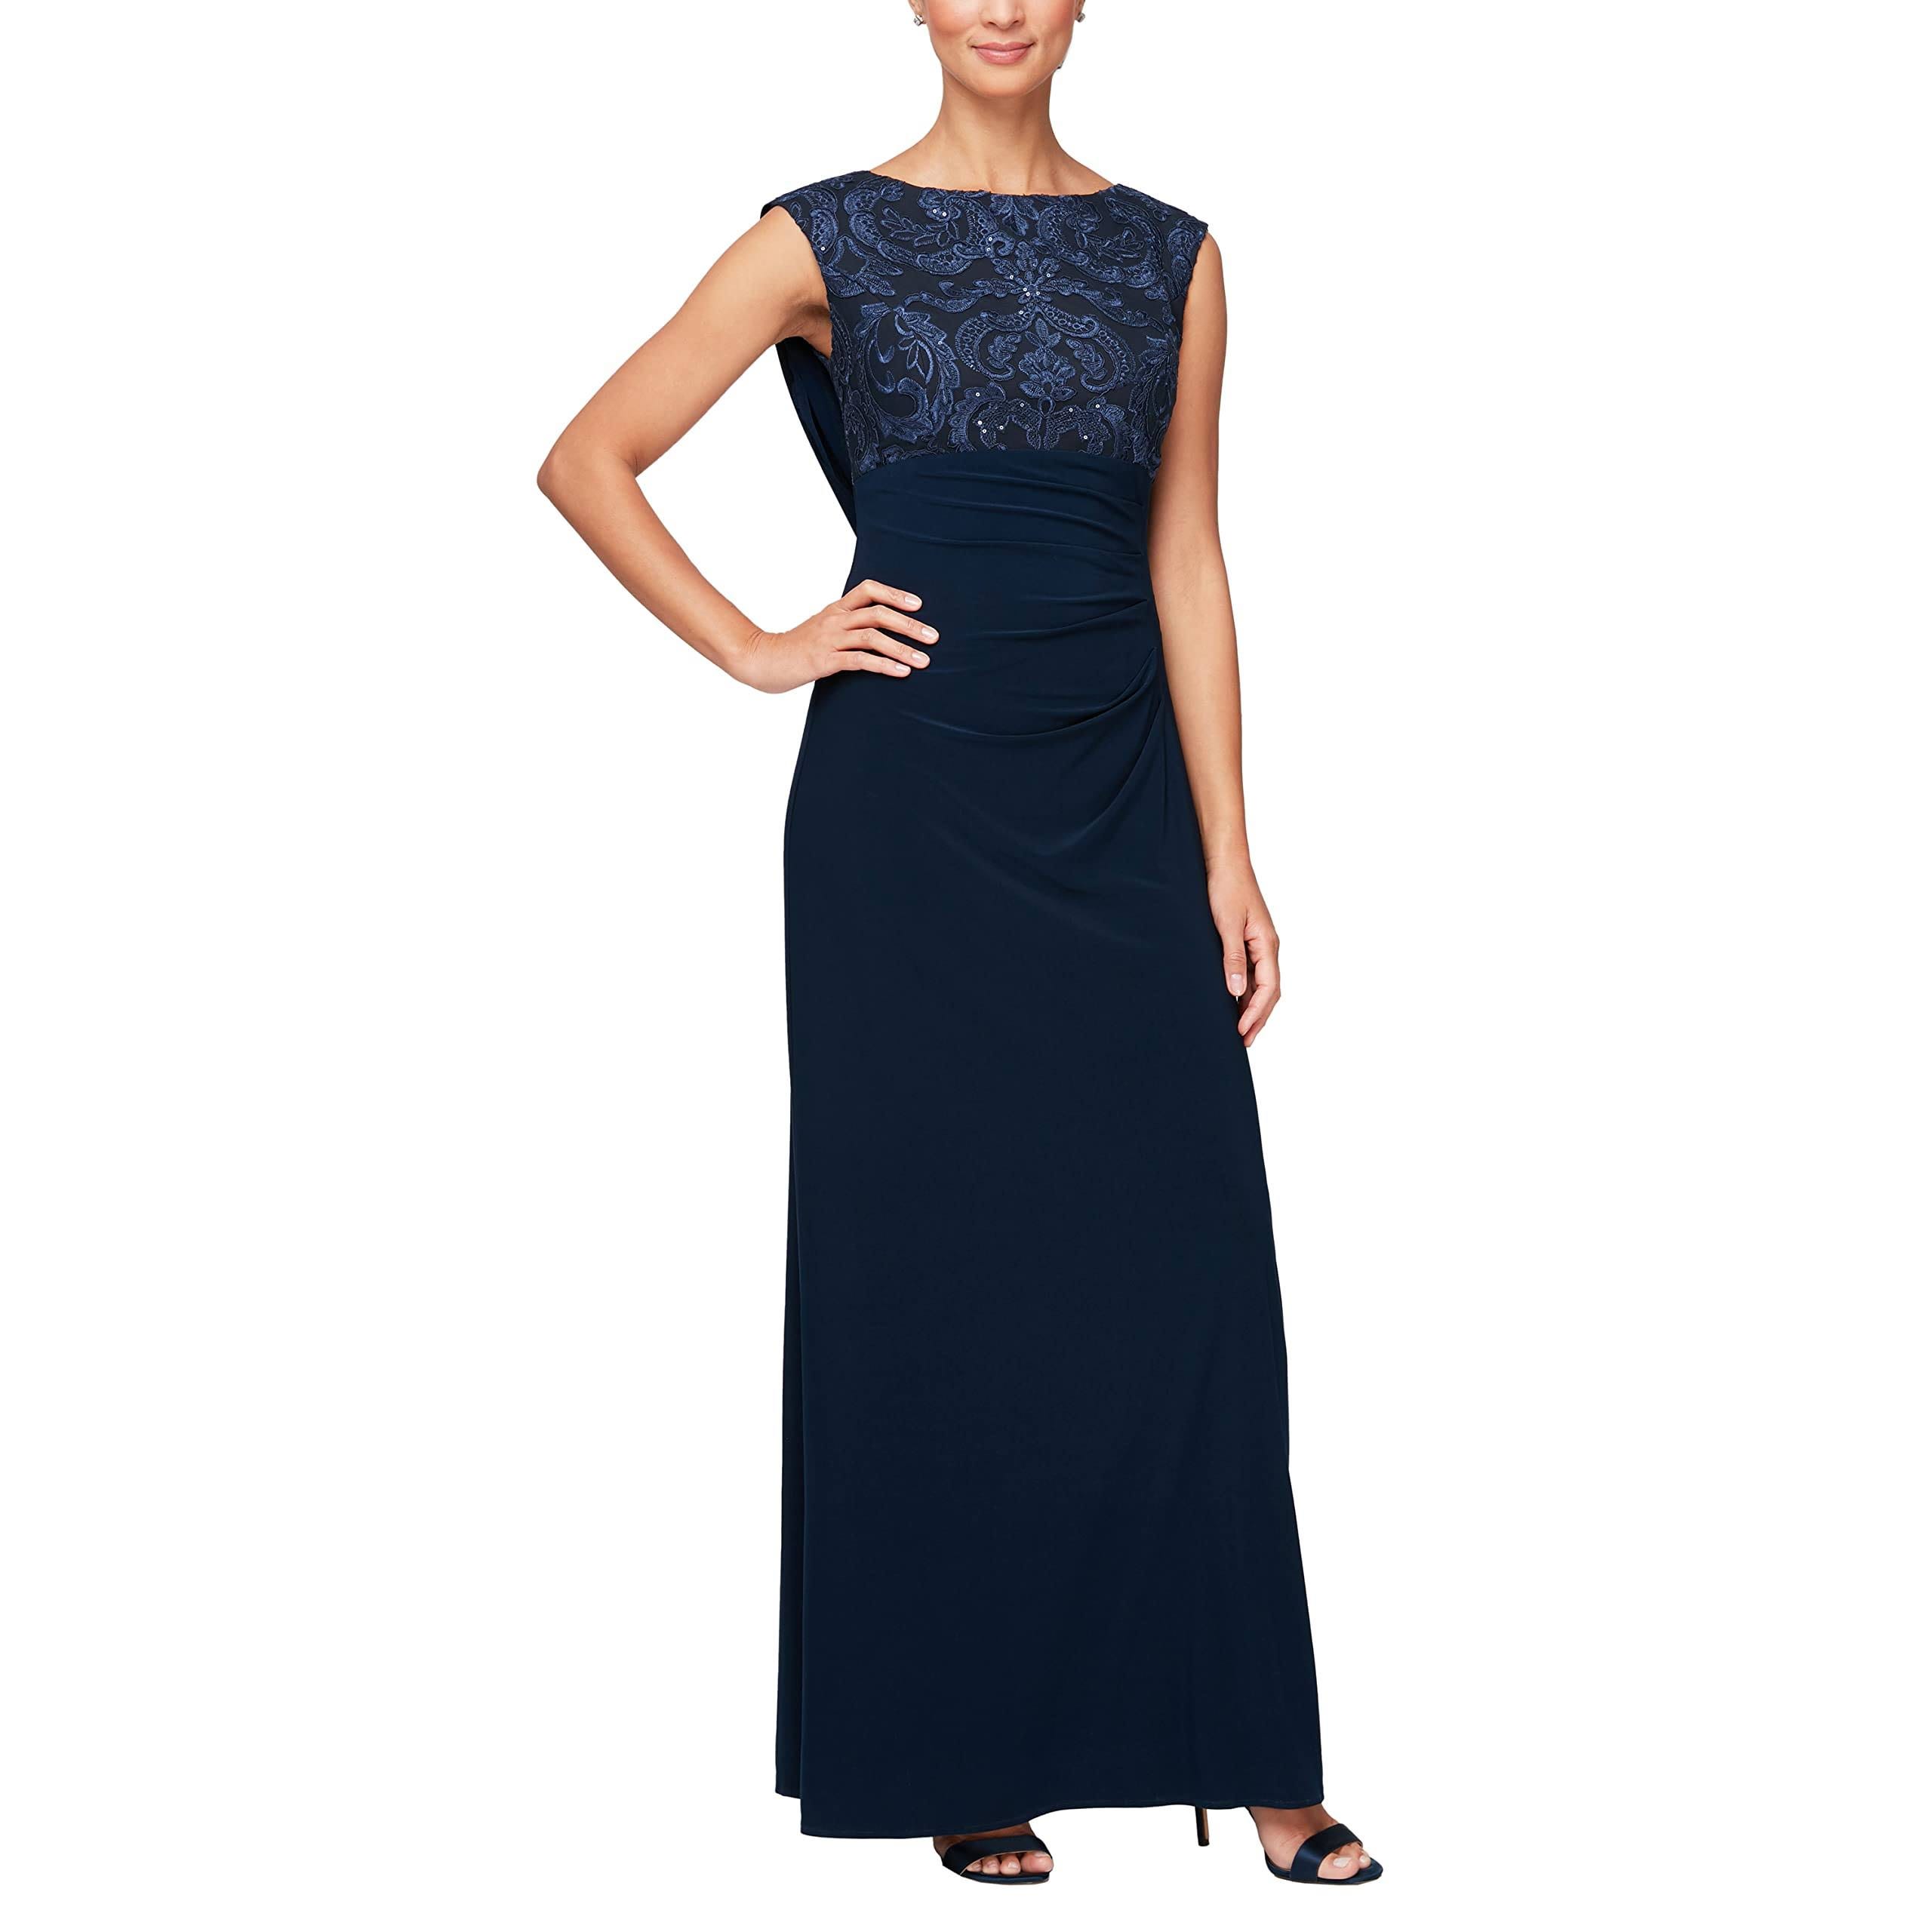 Elegant Petite Formal Dress with Cowl Back and Embroidered Sequin Lace Detail | Image